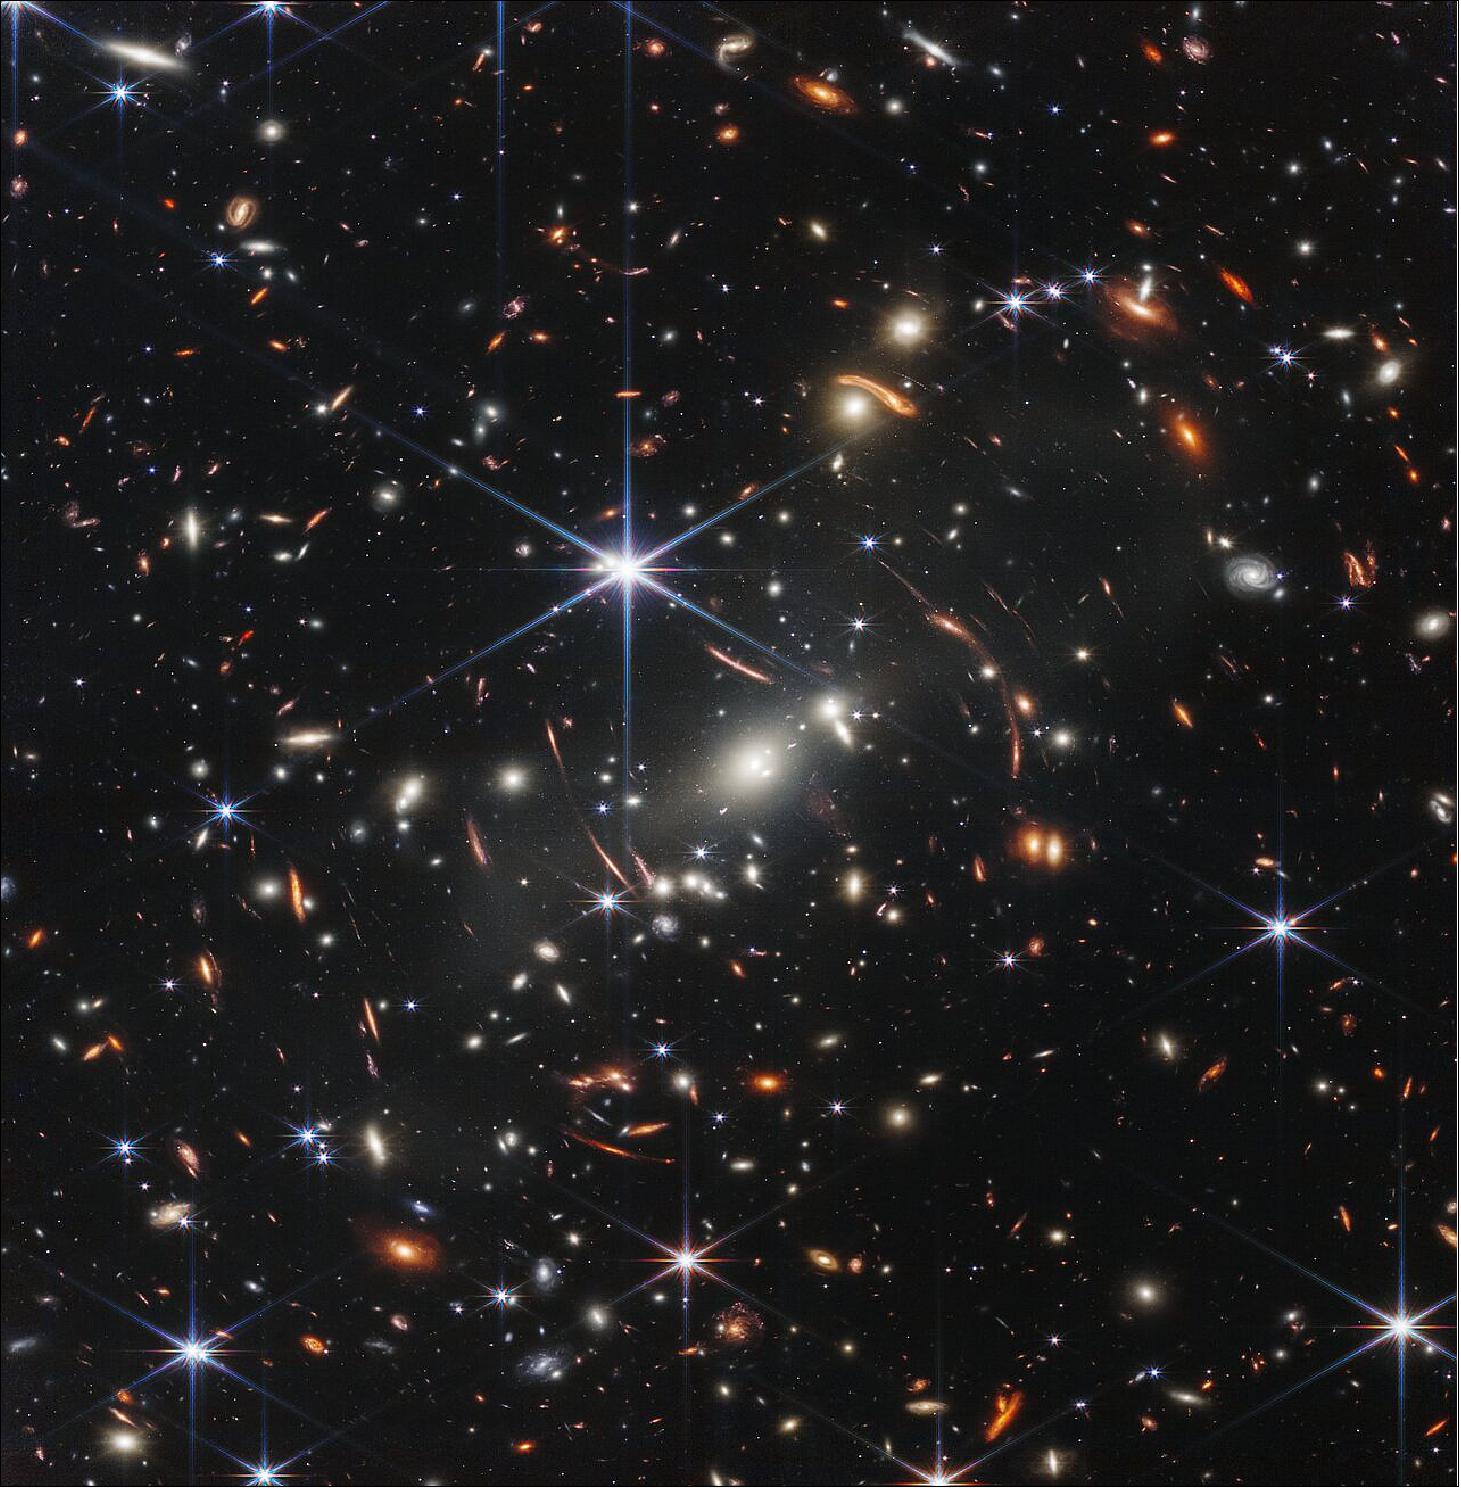 Figure 11: The image shows the galaxy cluster SMACS 0723 as it appeared 4.6 billion years ago. The combined mass of this galaxy cluster acts as a gravitational lens, magnifying much more distant galaxies behind it. Webb's NIRCam has brought those distant galaxies into sharp focus – they have tiny, faint structures that have never been seen before, including star clusters and diffuse features. Researchers will soon begin to learn more about the galaxies' masses, ages, histories, and compositions, as Webb seeks the earliest galaxies in the universe (image credit: NASA, ESA, CSA, and STScI)